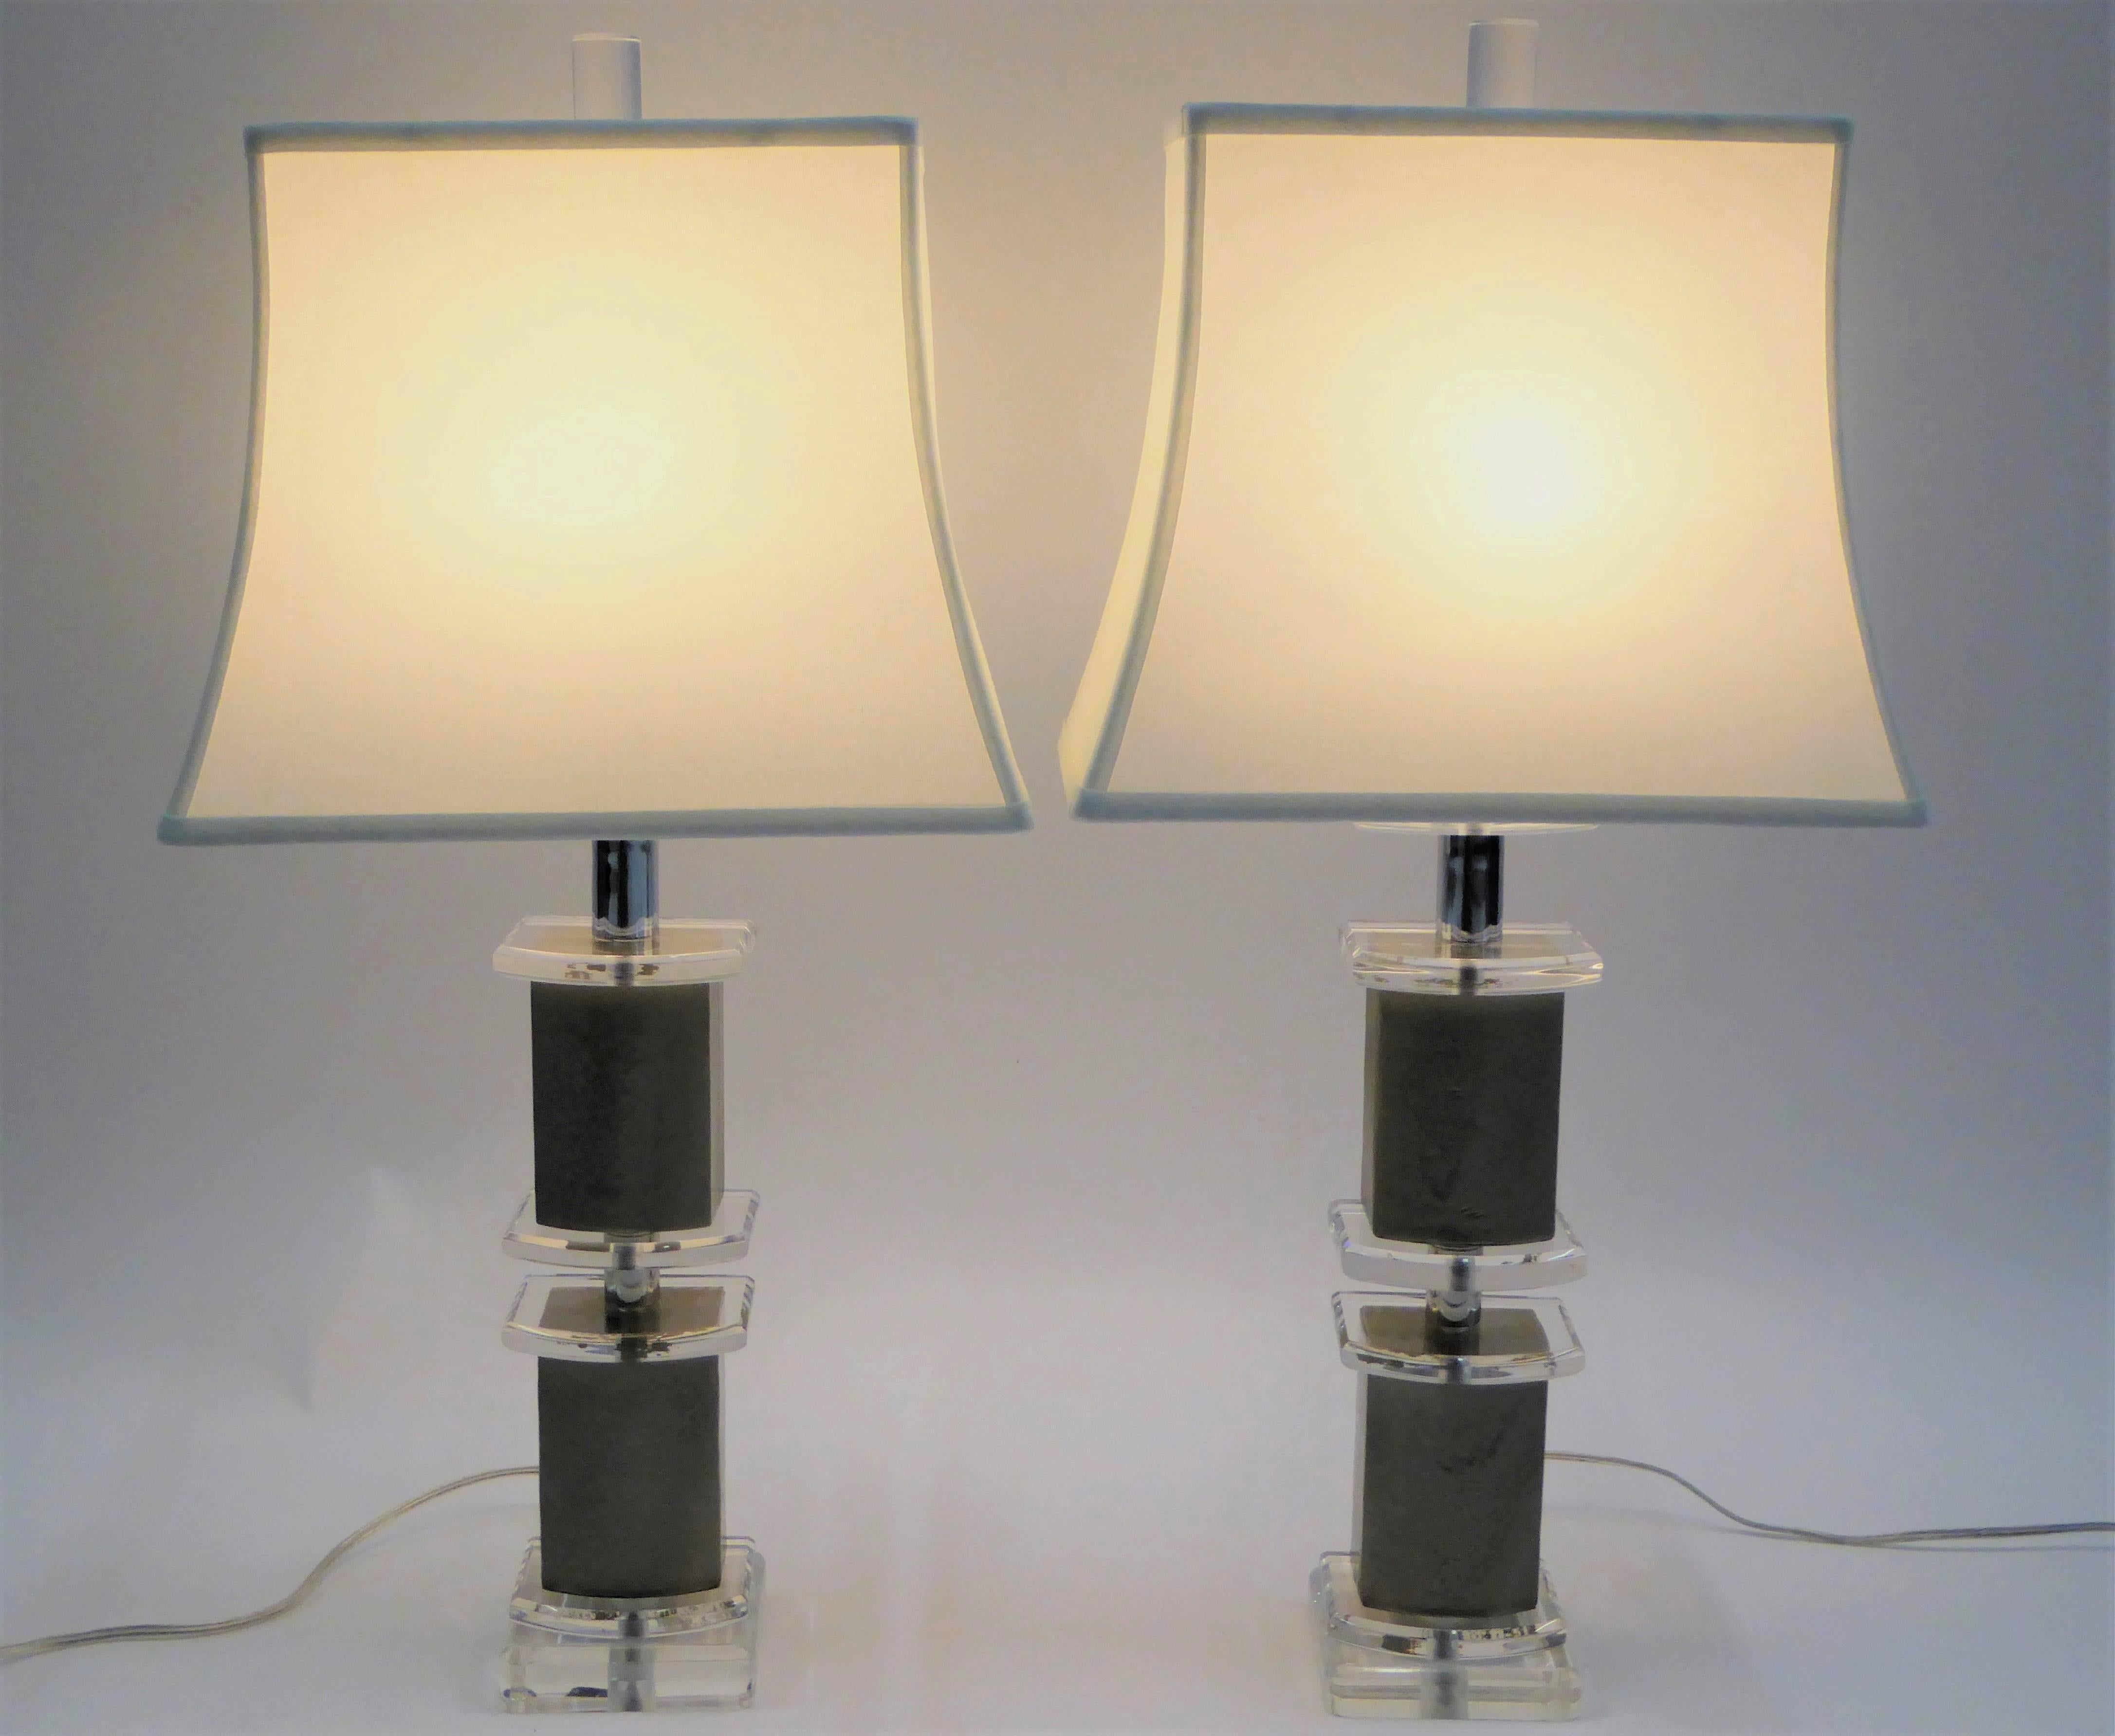 Swanky and urbane pair of 1970s Bauer Lucite and lacquered leather Lamps with a narrow profile of stepped levels of D-shaped Lucite and pewter colored lacquered leather covered blocks. All new wiring, new UL socket and Hi-Lo on cord switch. Custom